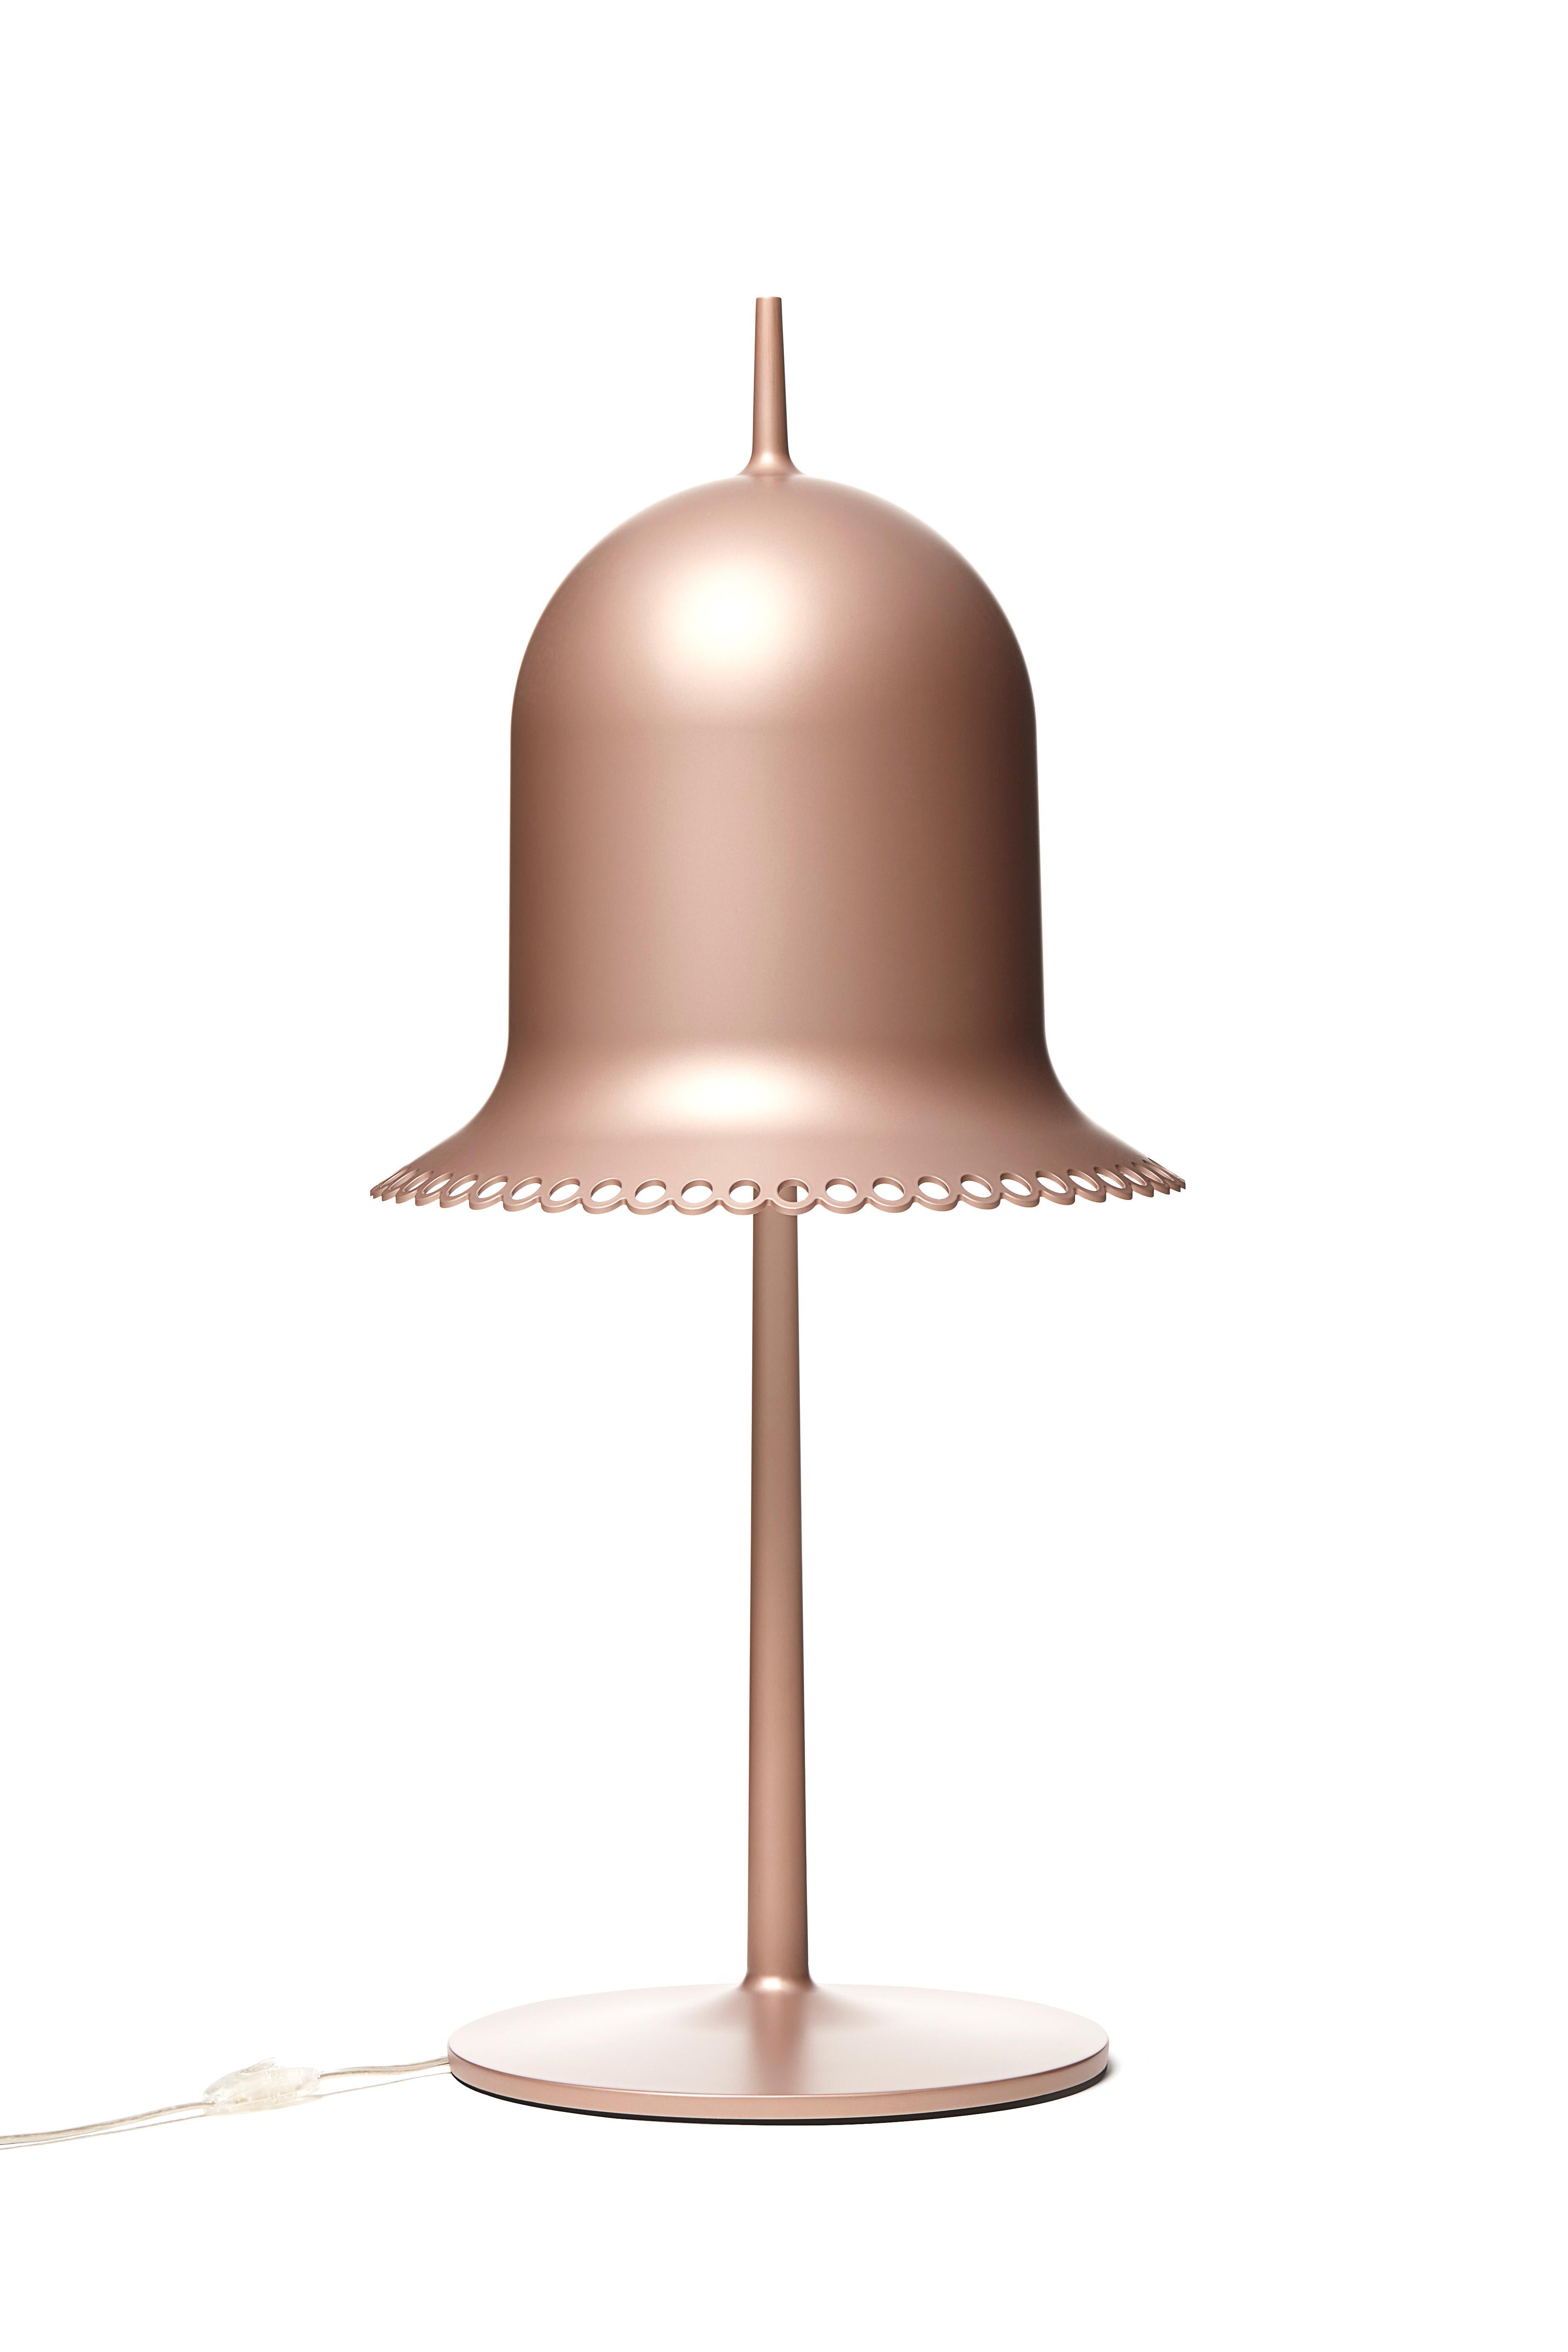 Molded Moooi Lolita Table Lamp in Pink Lacquered Plastic by Nika Zupanc For Sale